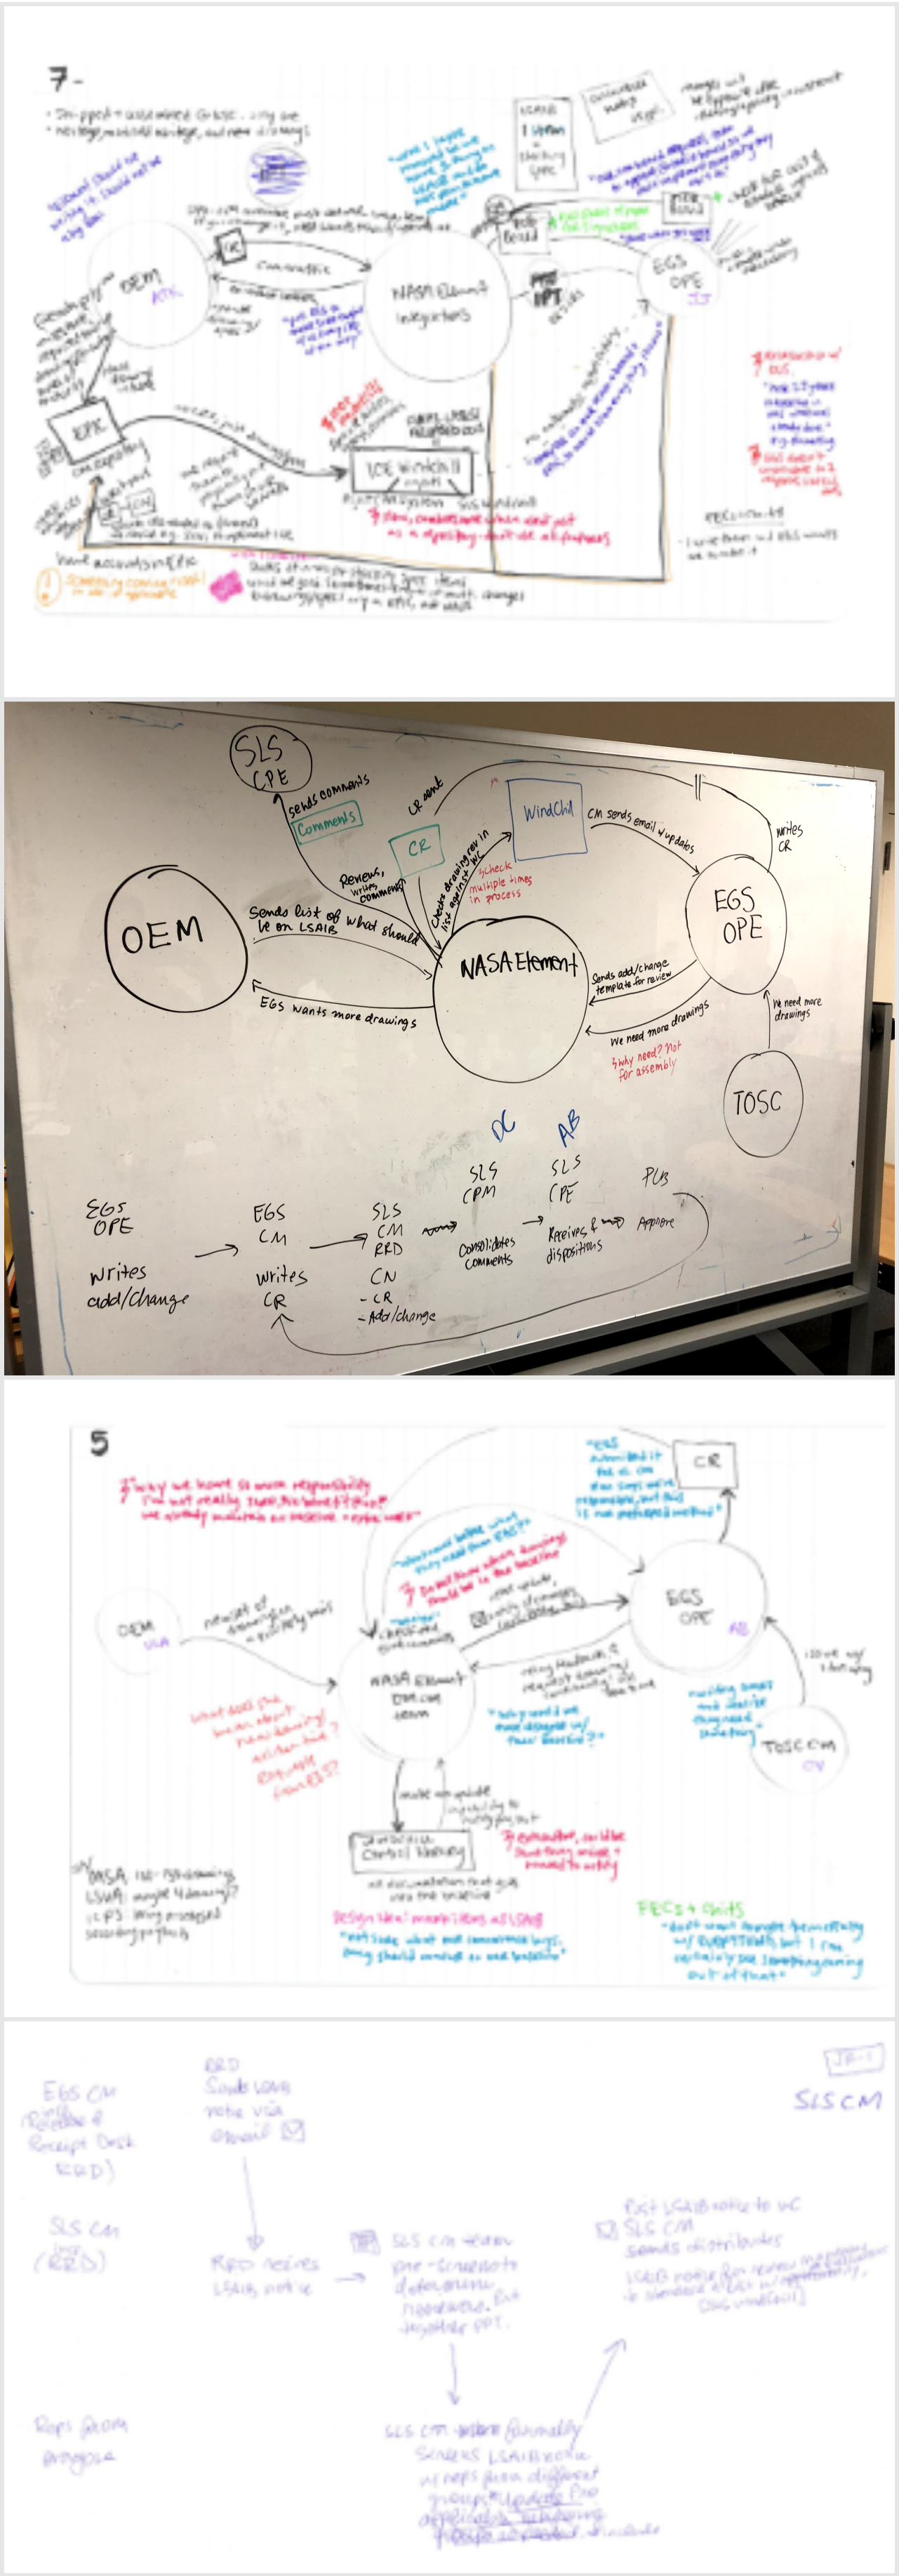 After each contextual interview with subject-matter experts, we sketched workflow diagrams to document our understanding of the existing process.